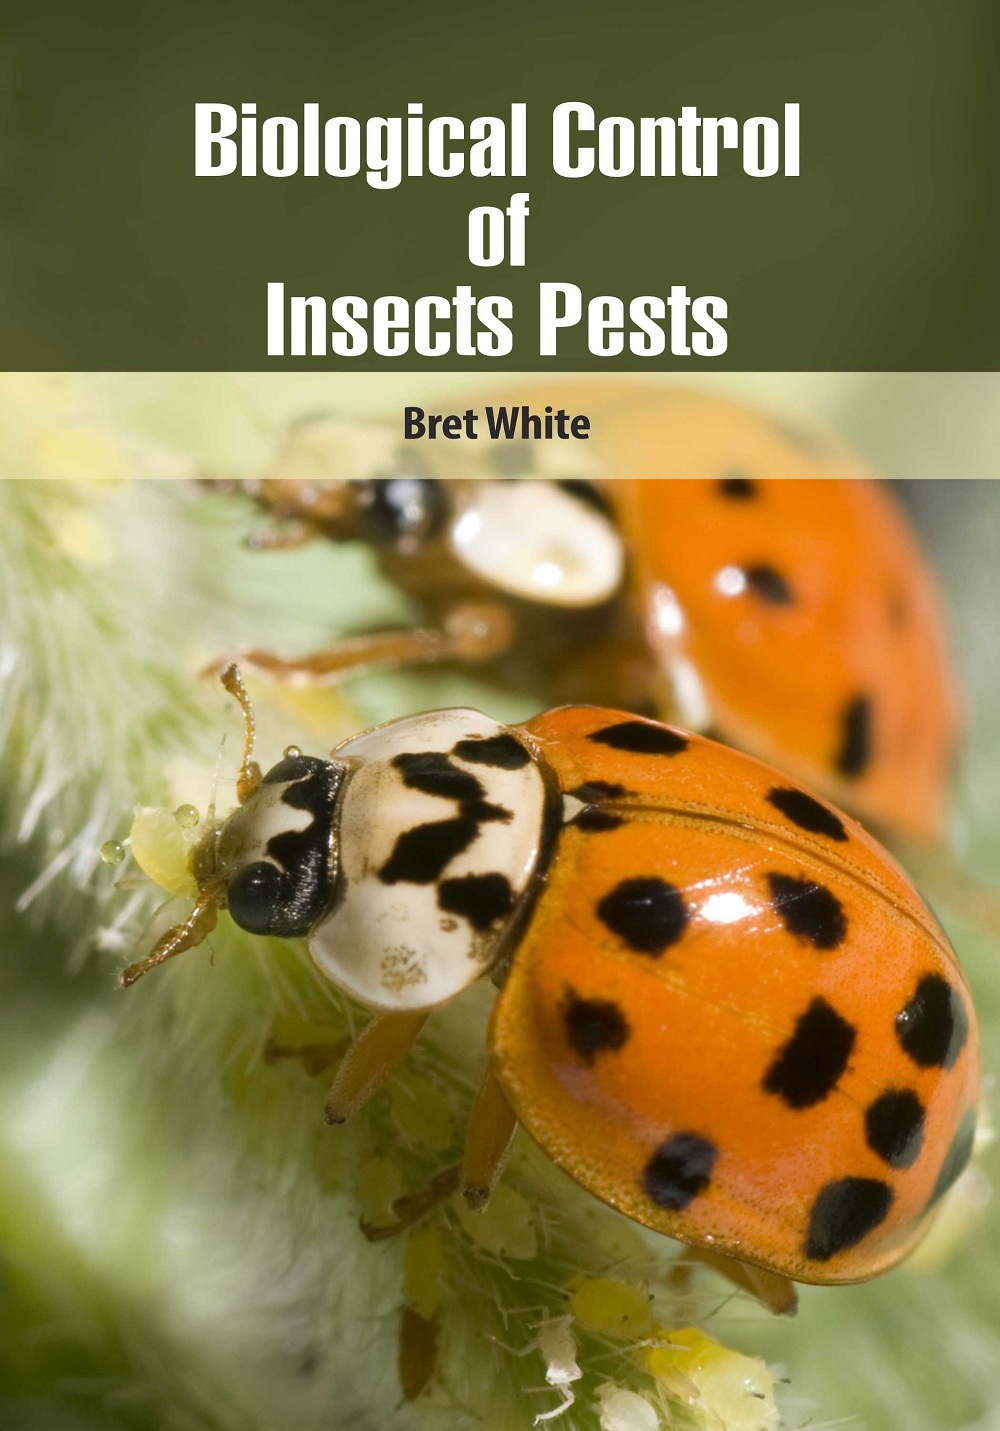 Biological Control of Insects Pests